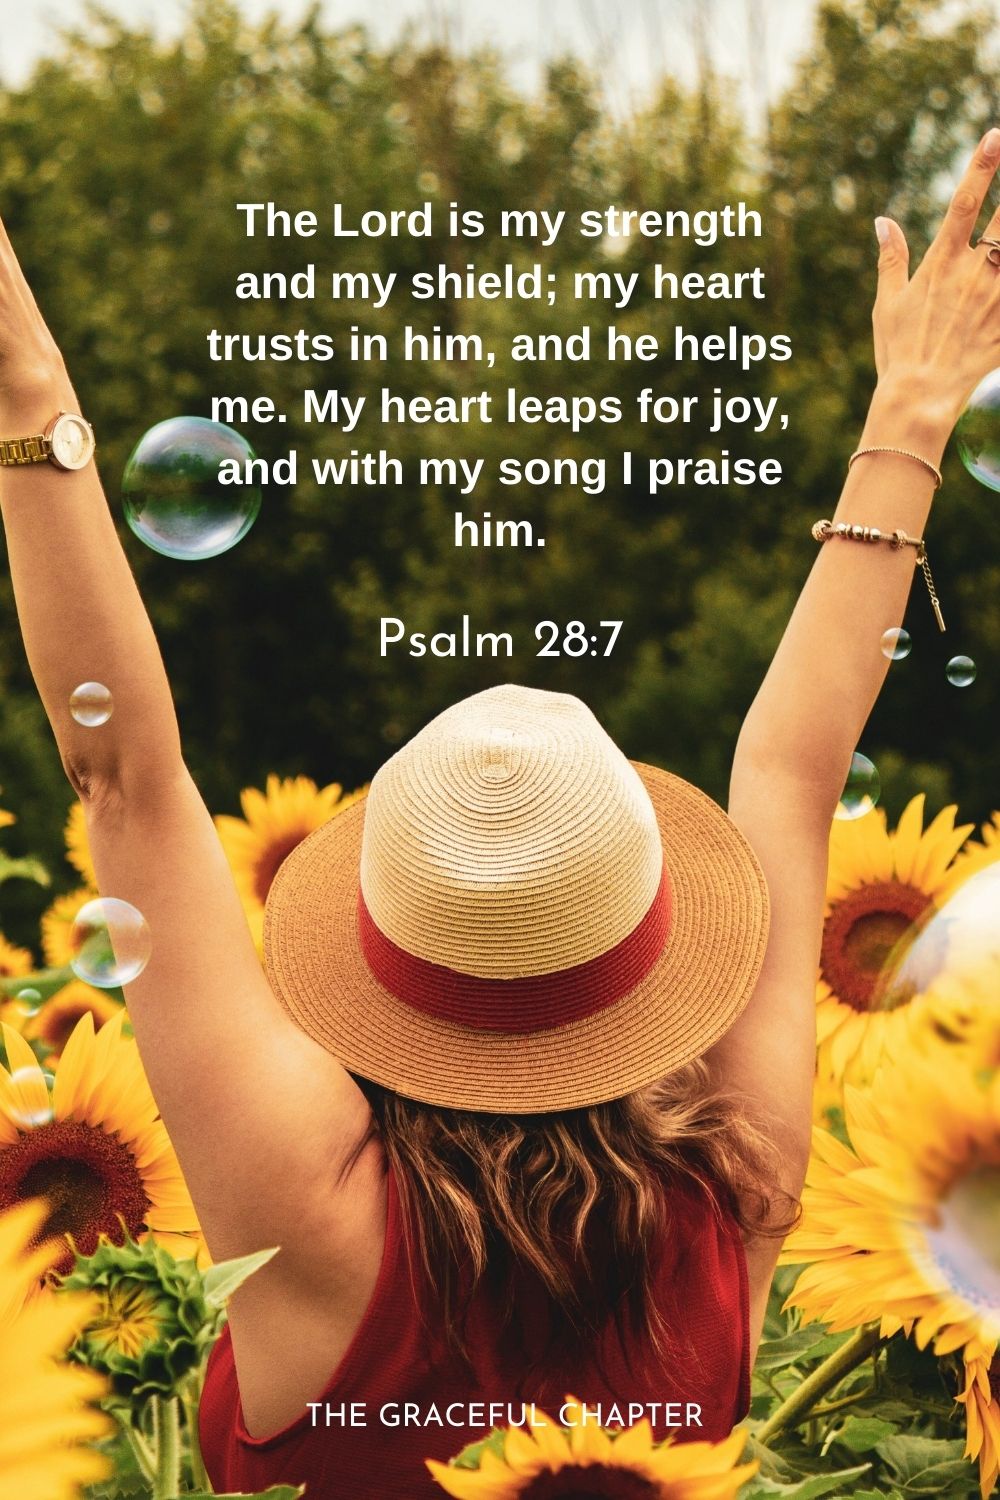 The Lord is my strength and my shield; my heart trusts in him, and he helps me. My heart leaps for joy, and with my song I praise him